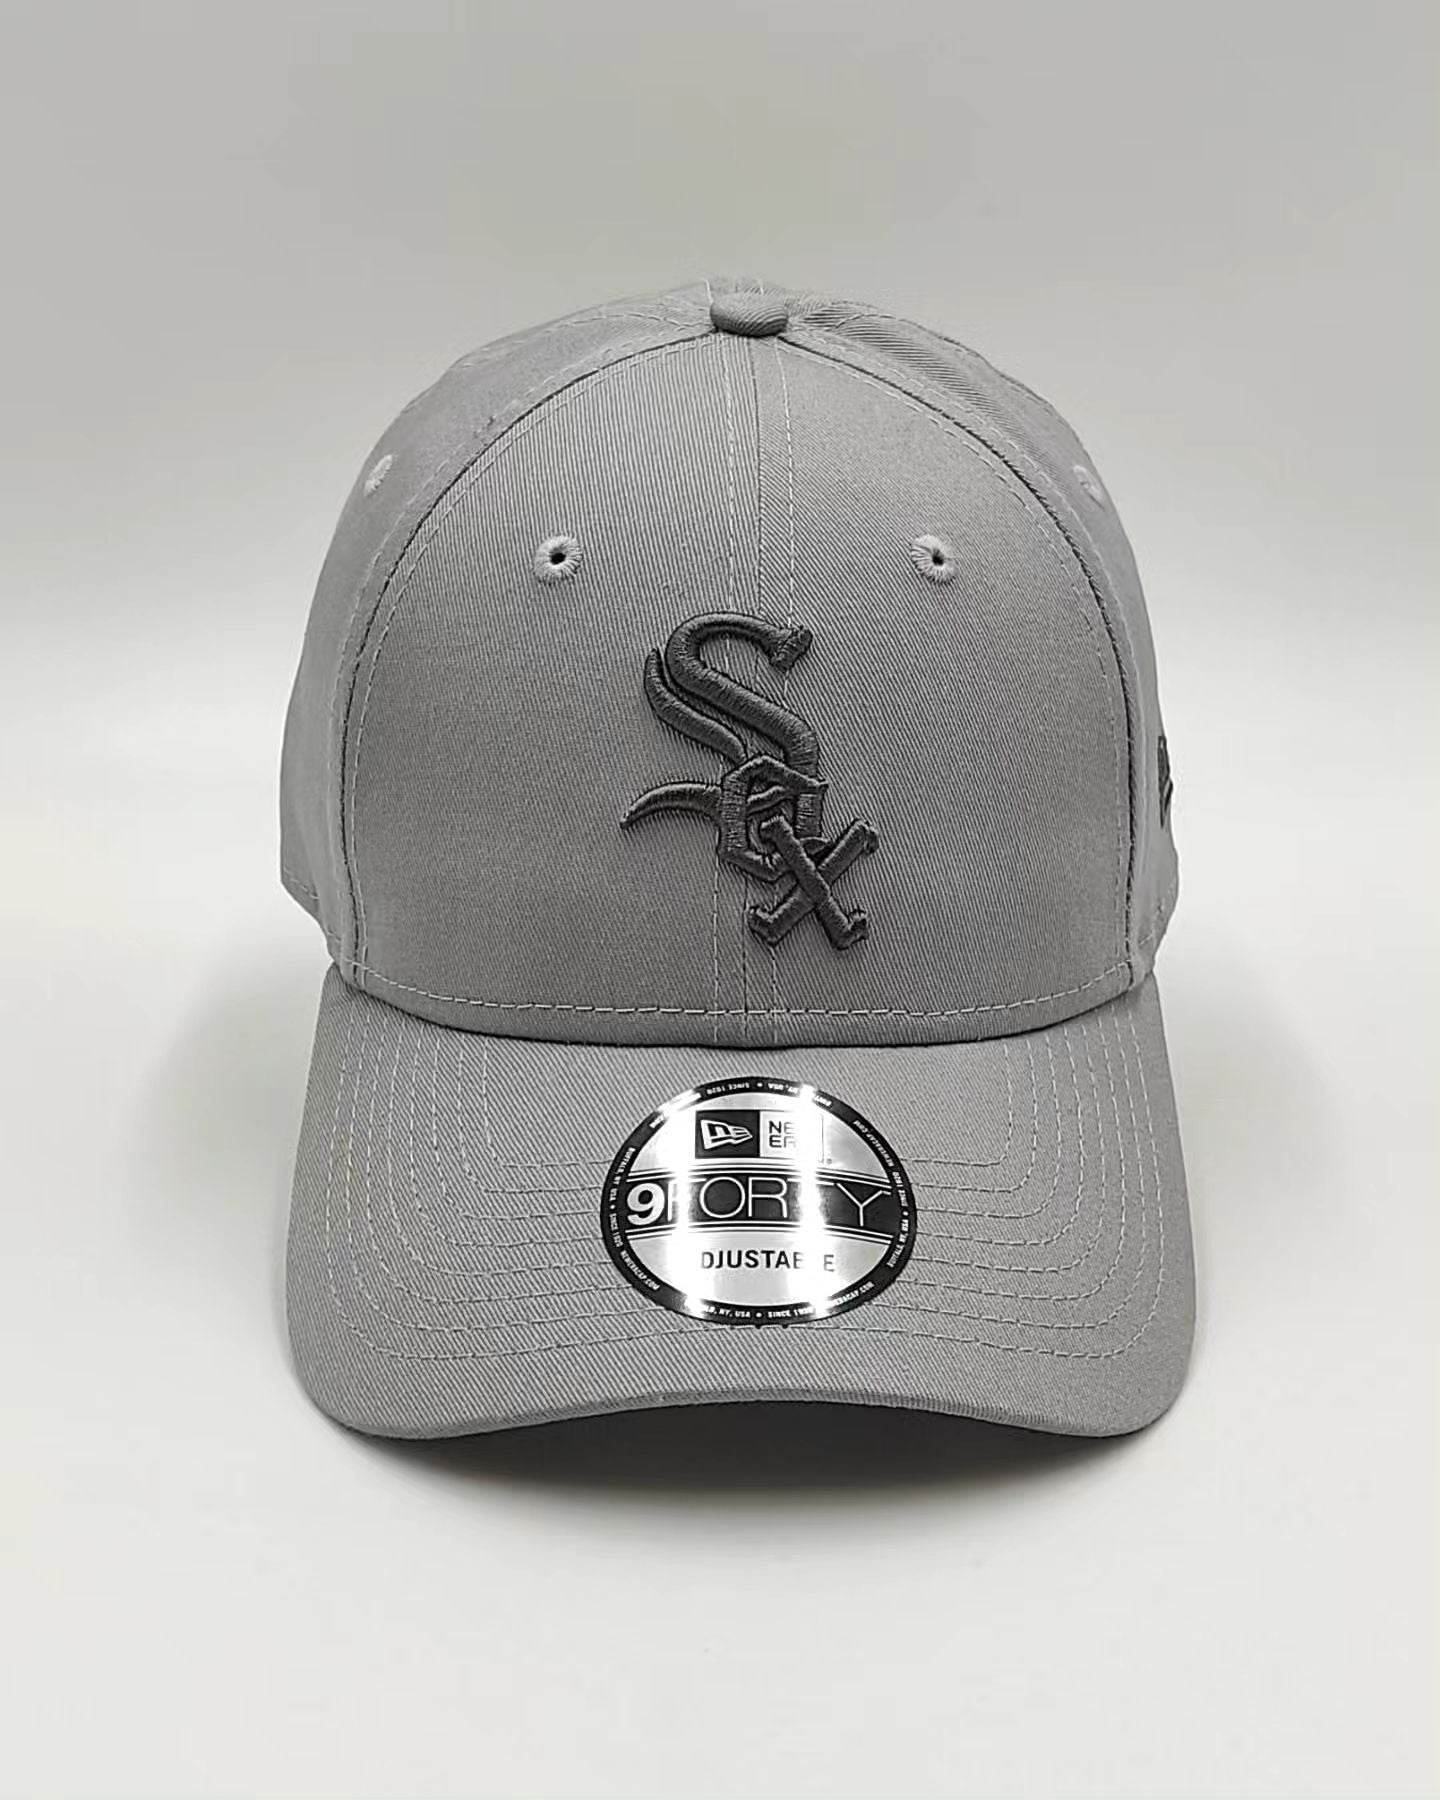 New Era White Sox league Essential 9forty